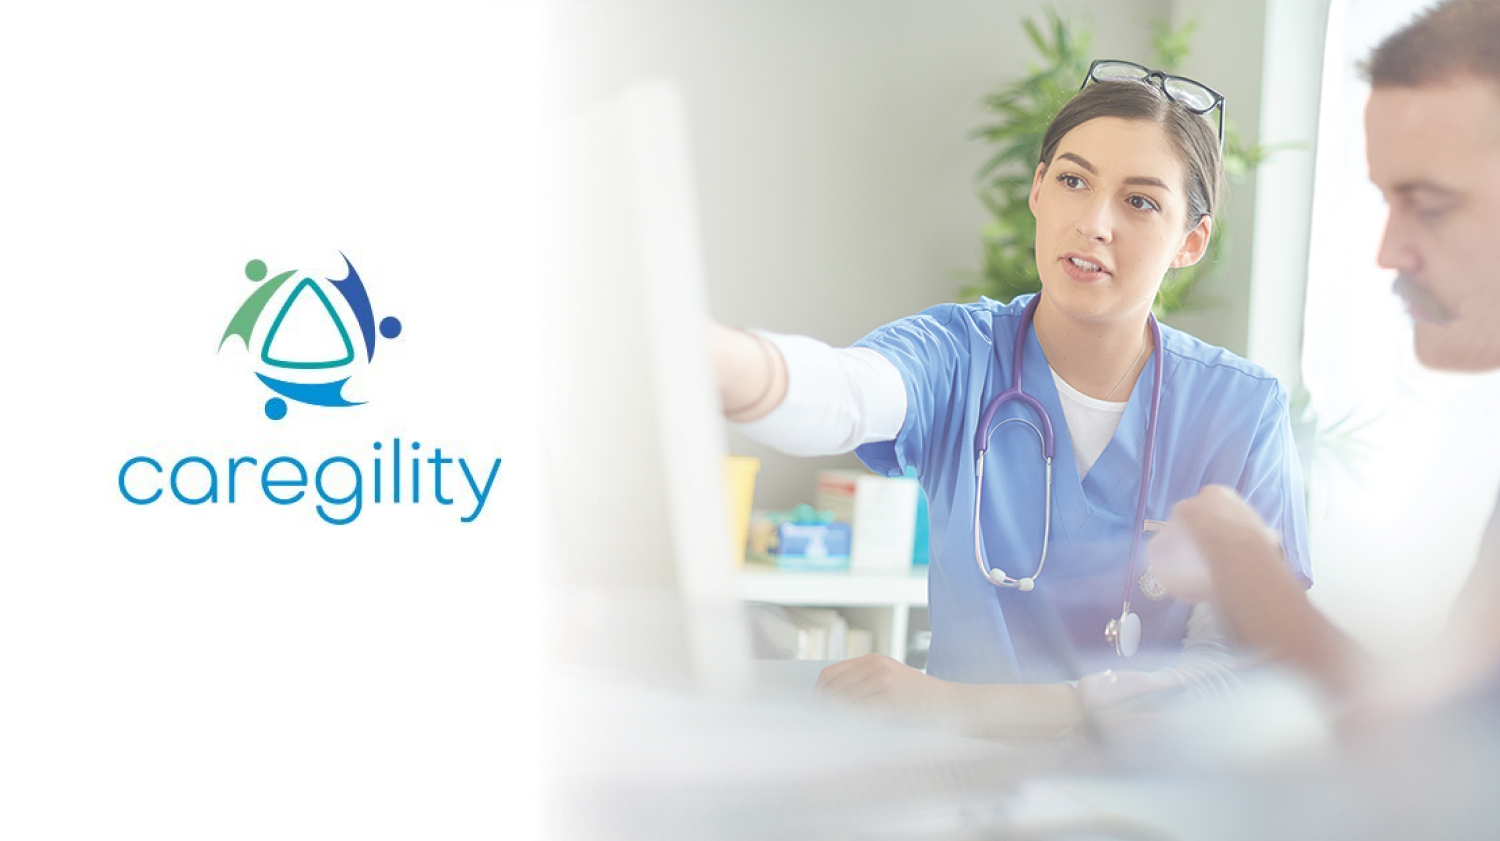 Caregility Connected with Agency Creative To Grow Their Virtual Care